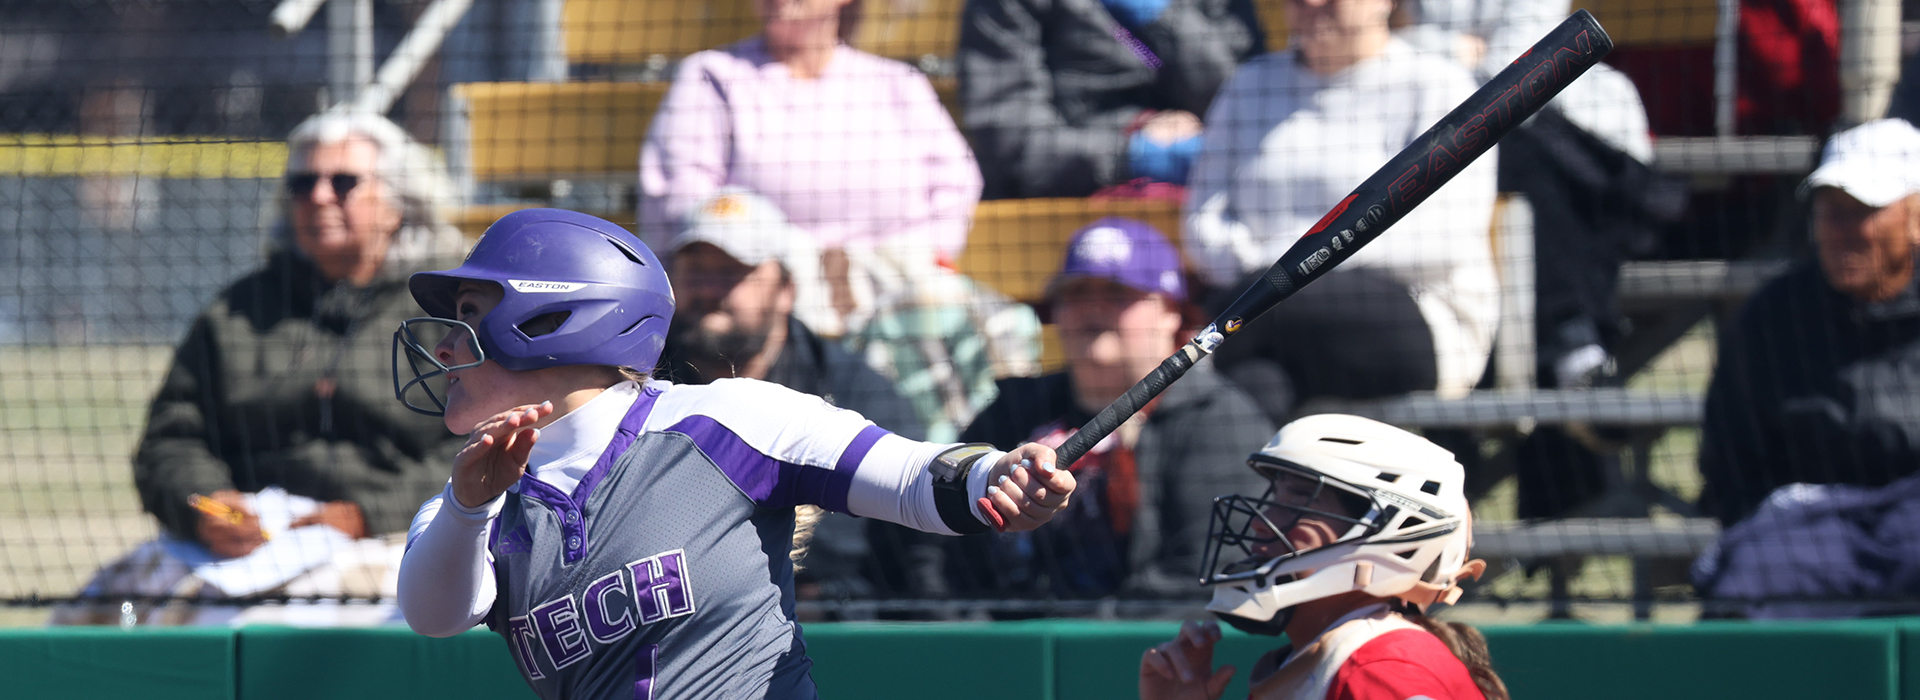 Five-run fifth gives Tech Softball series win over Morehead State